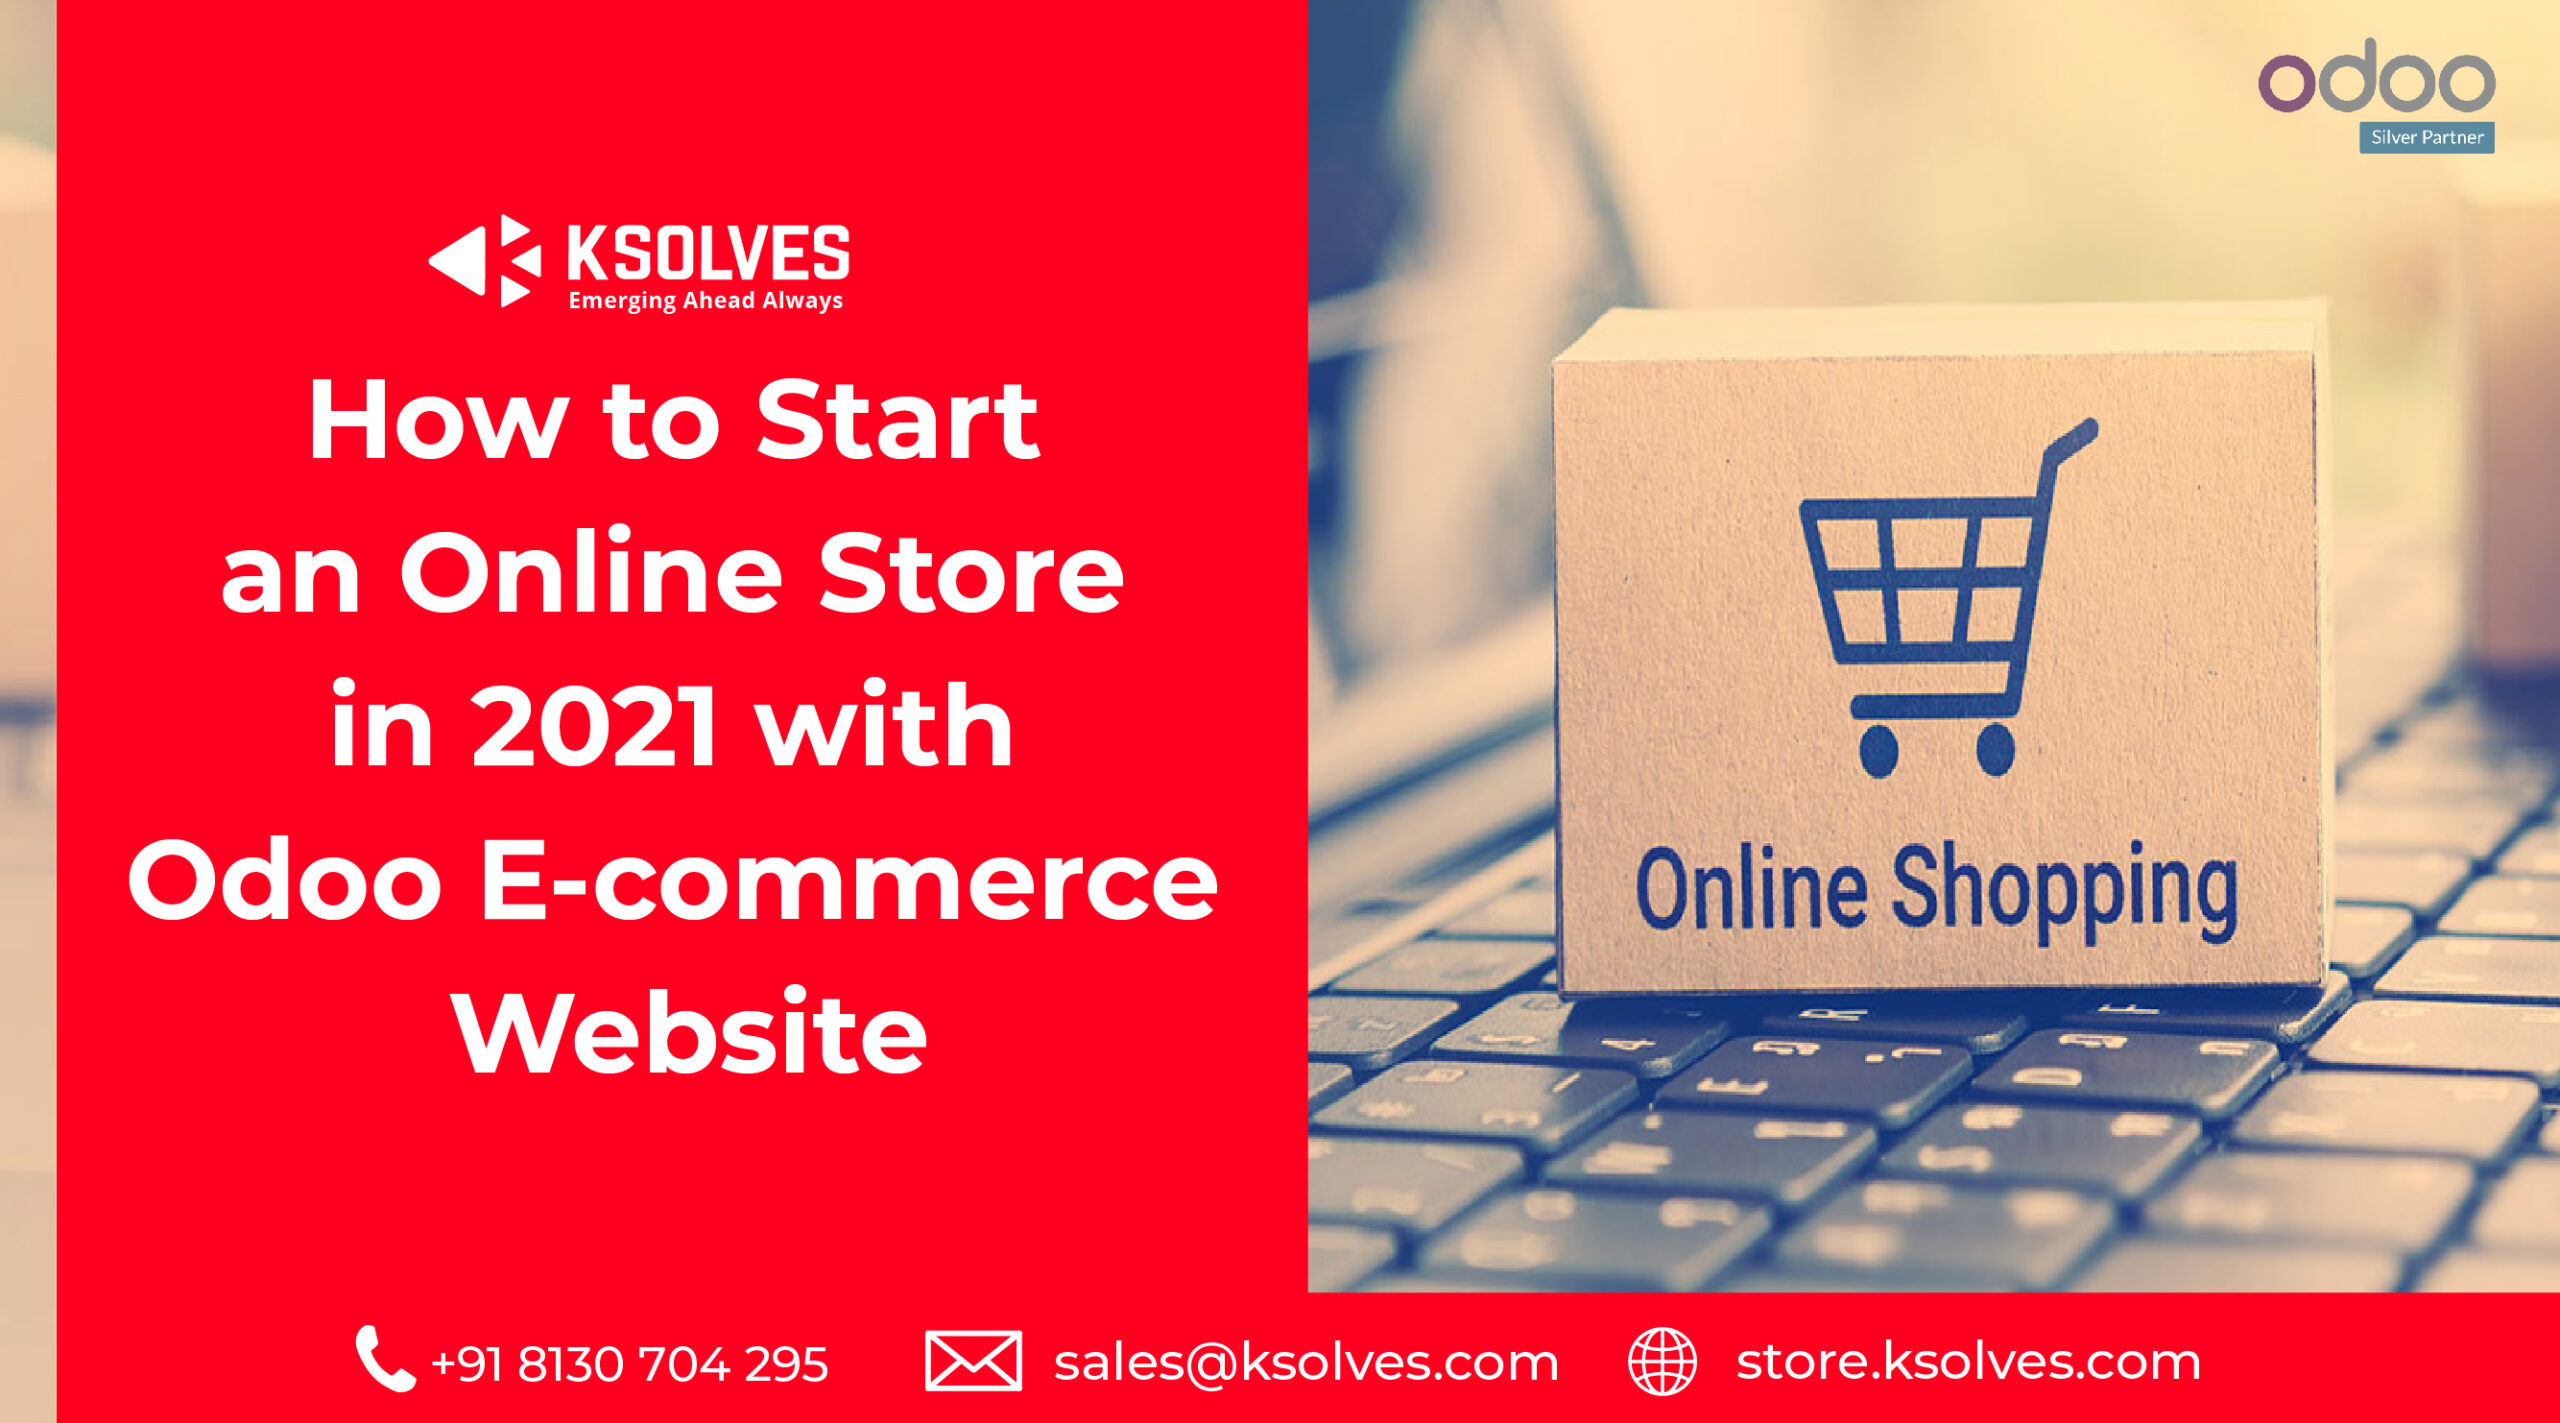 How to Start an Online Store in 2021 with Odoo Ecommerce